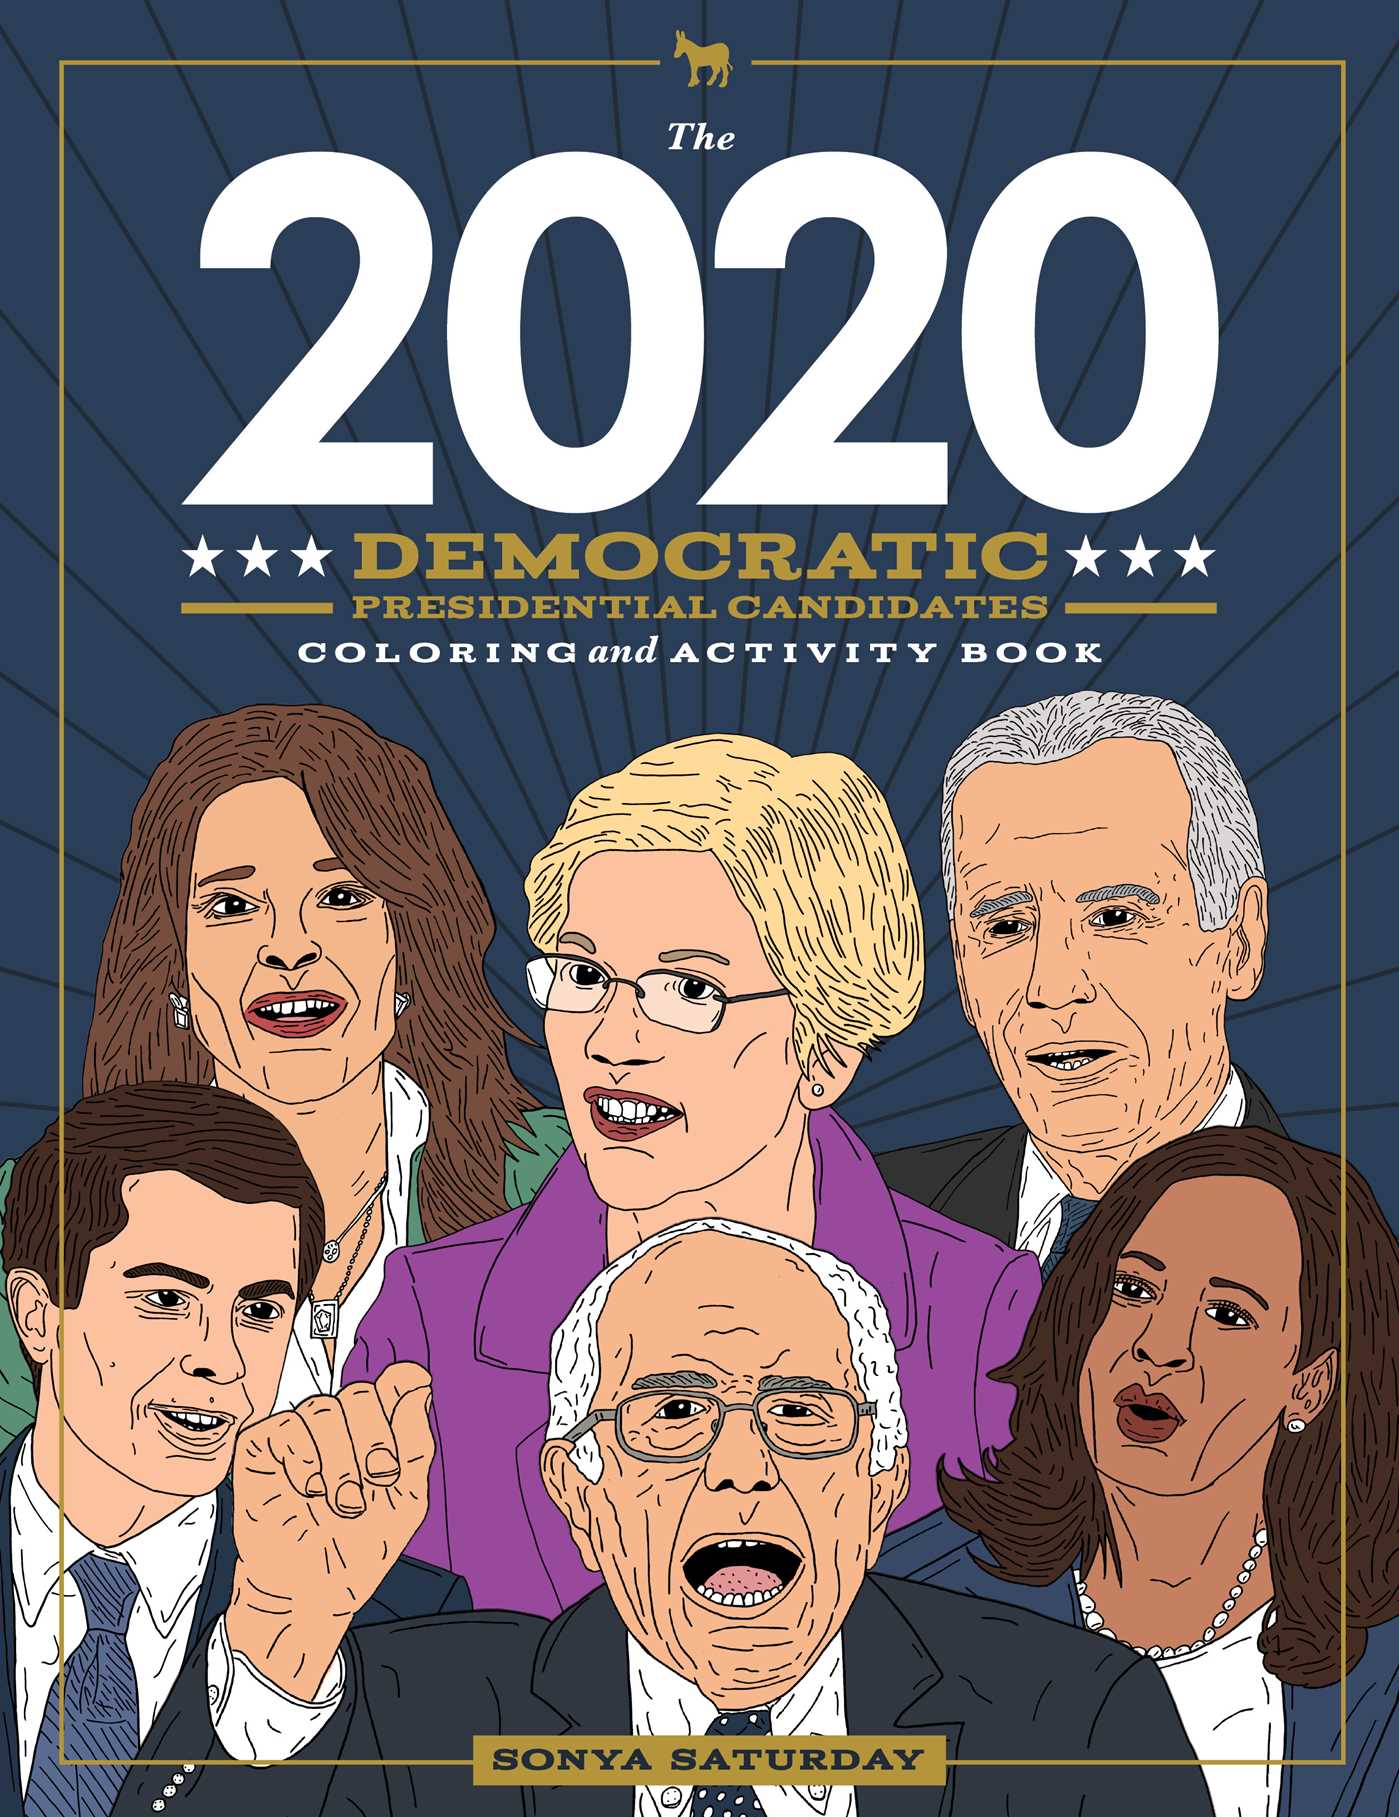 Read The 2020 Democratic Presidential Candidates Coloring and Activity Book - Sonya Saturday | ePub